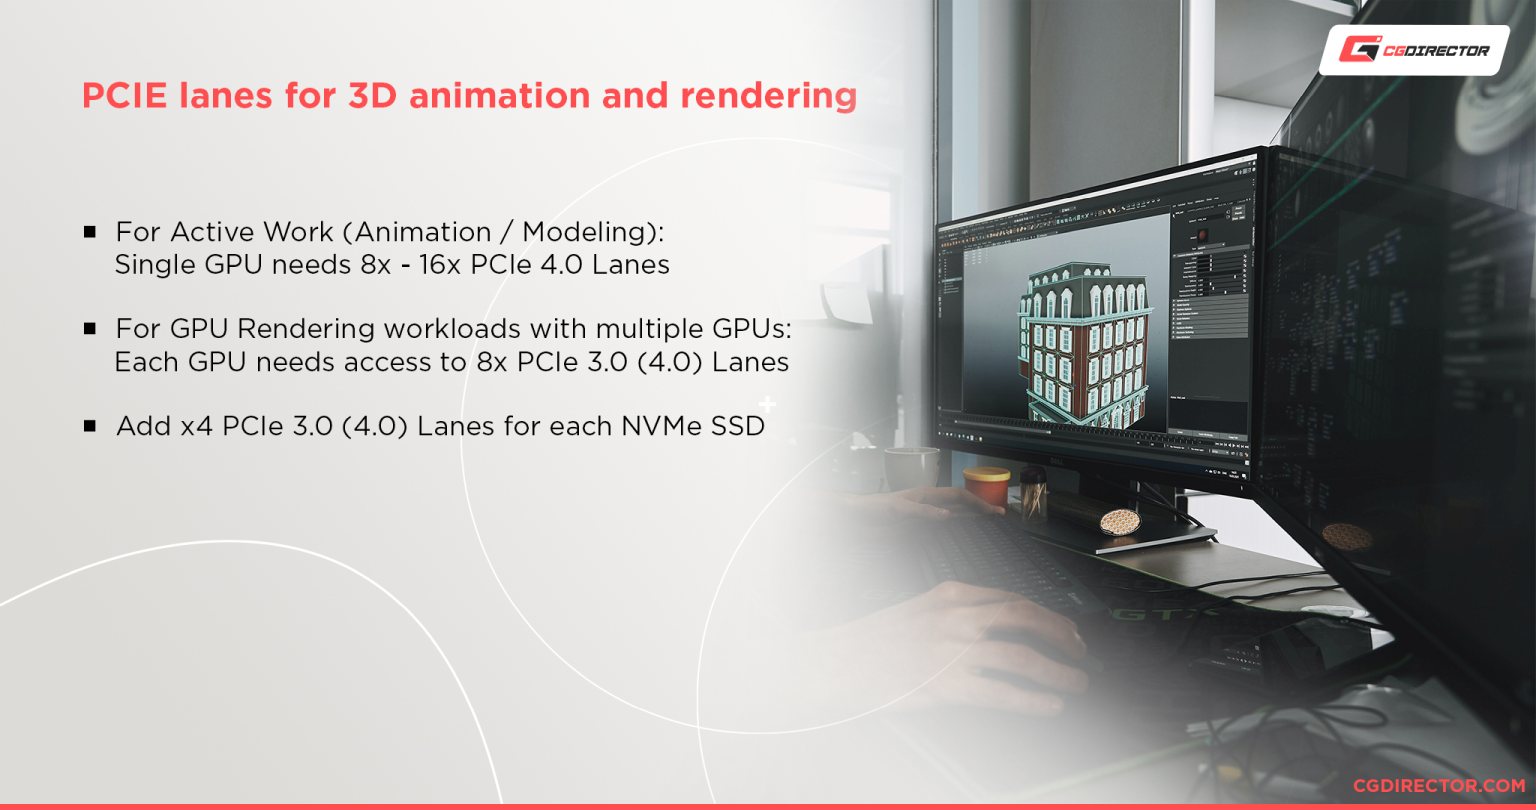 Required PCIE lanes for 3D animation and rendering